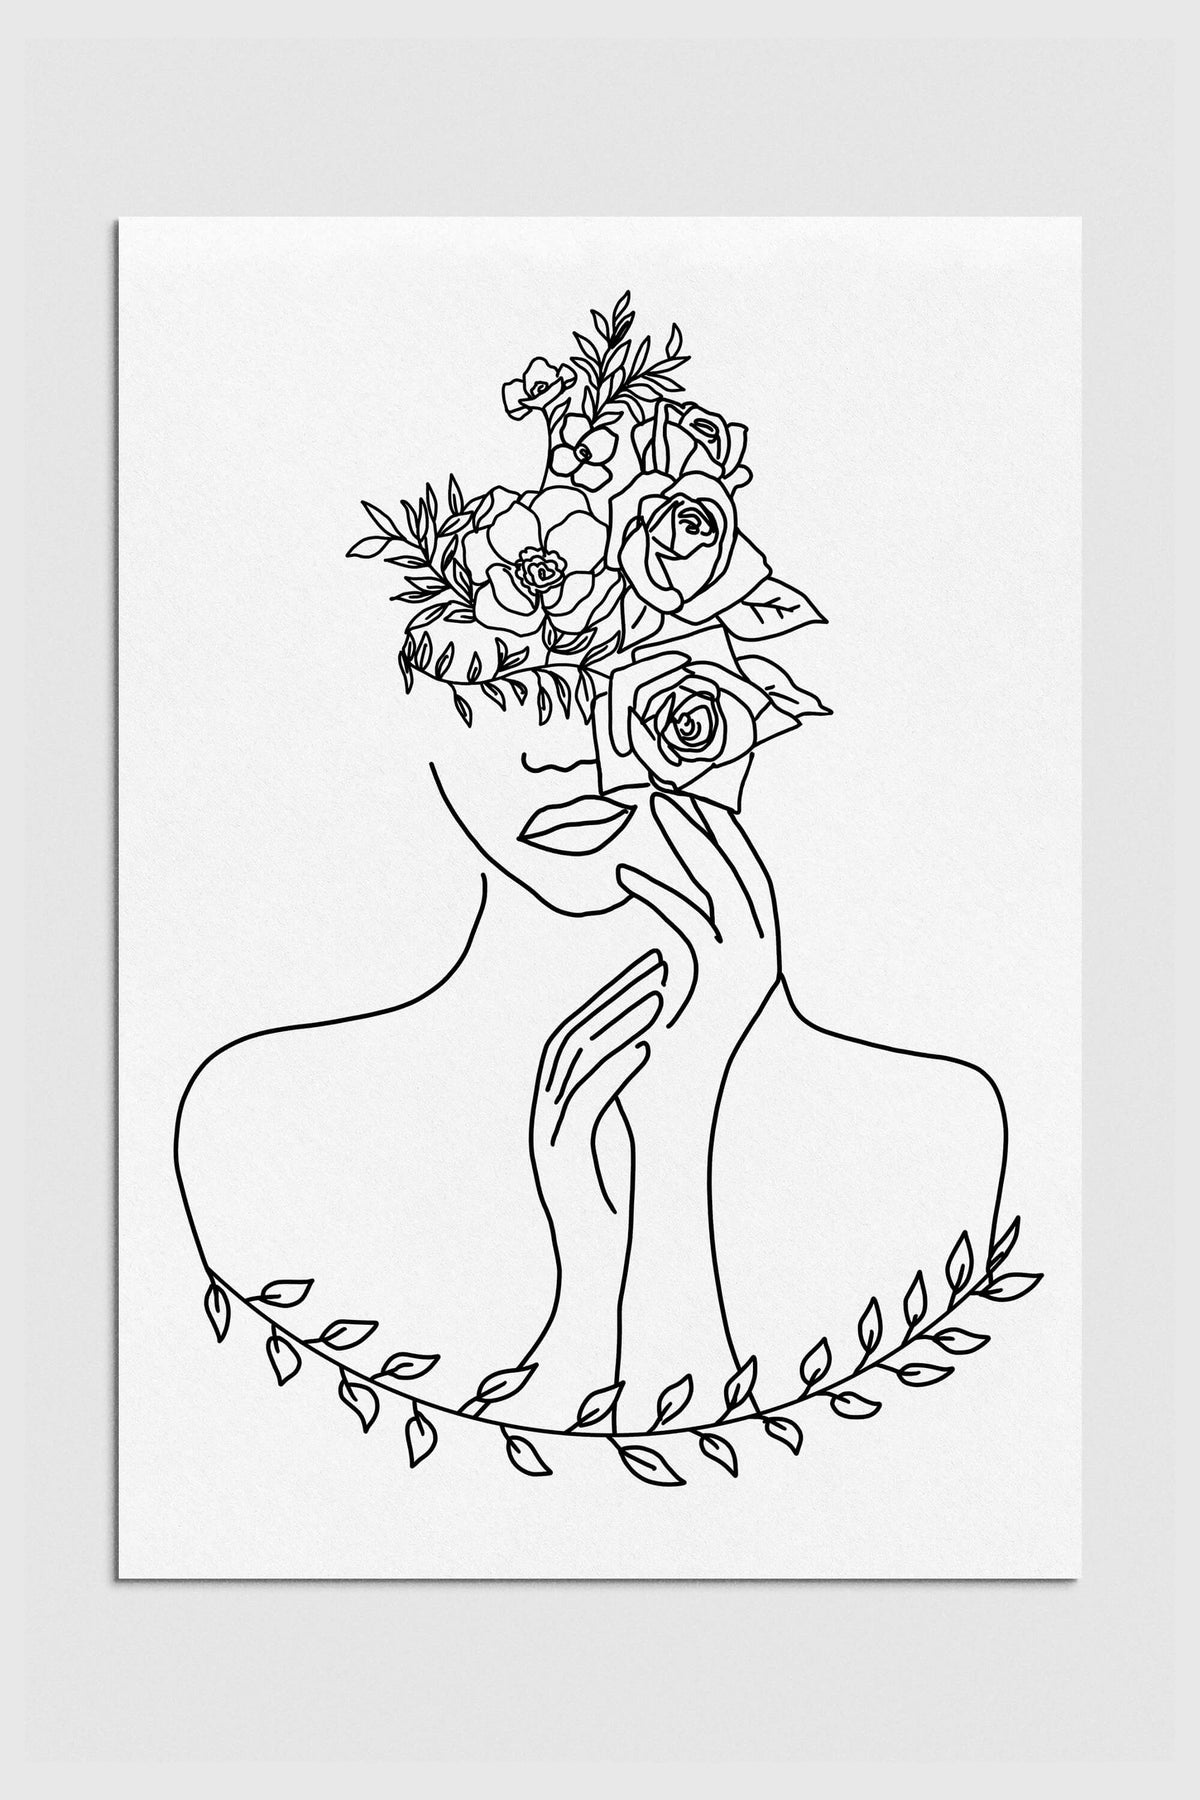 A captivating monochrome art print featuring an elegant line drawing of a woman adorned with intricate floral details. The minimalist yet detailed design adds a touch of sophistication to any space.